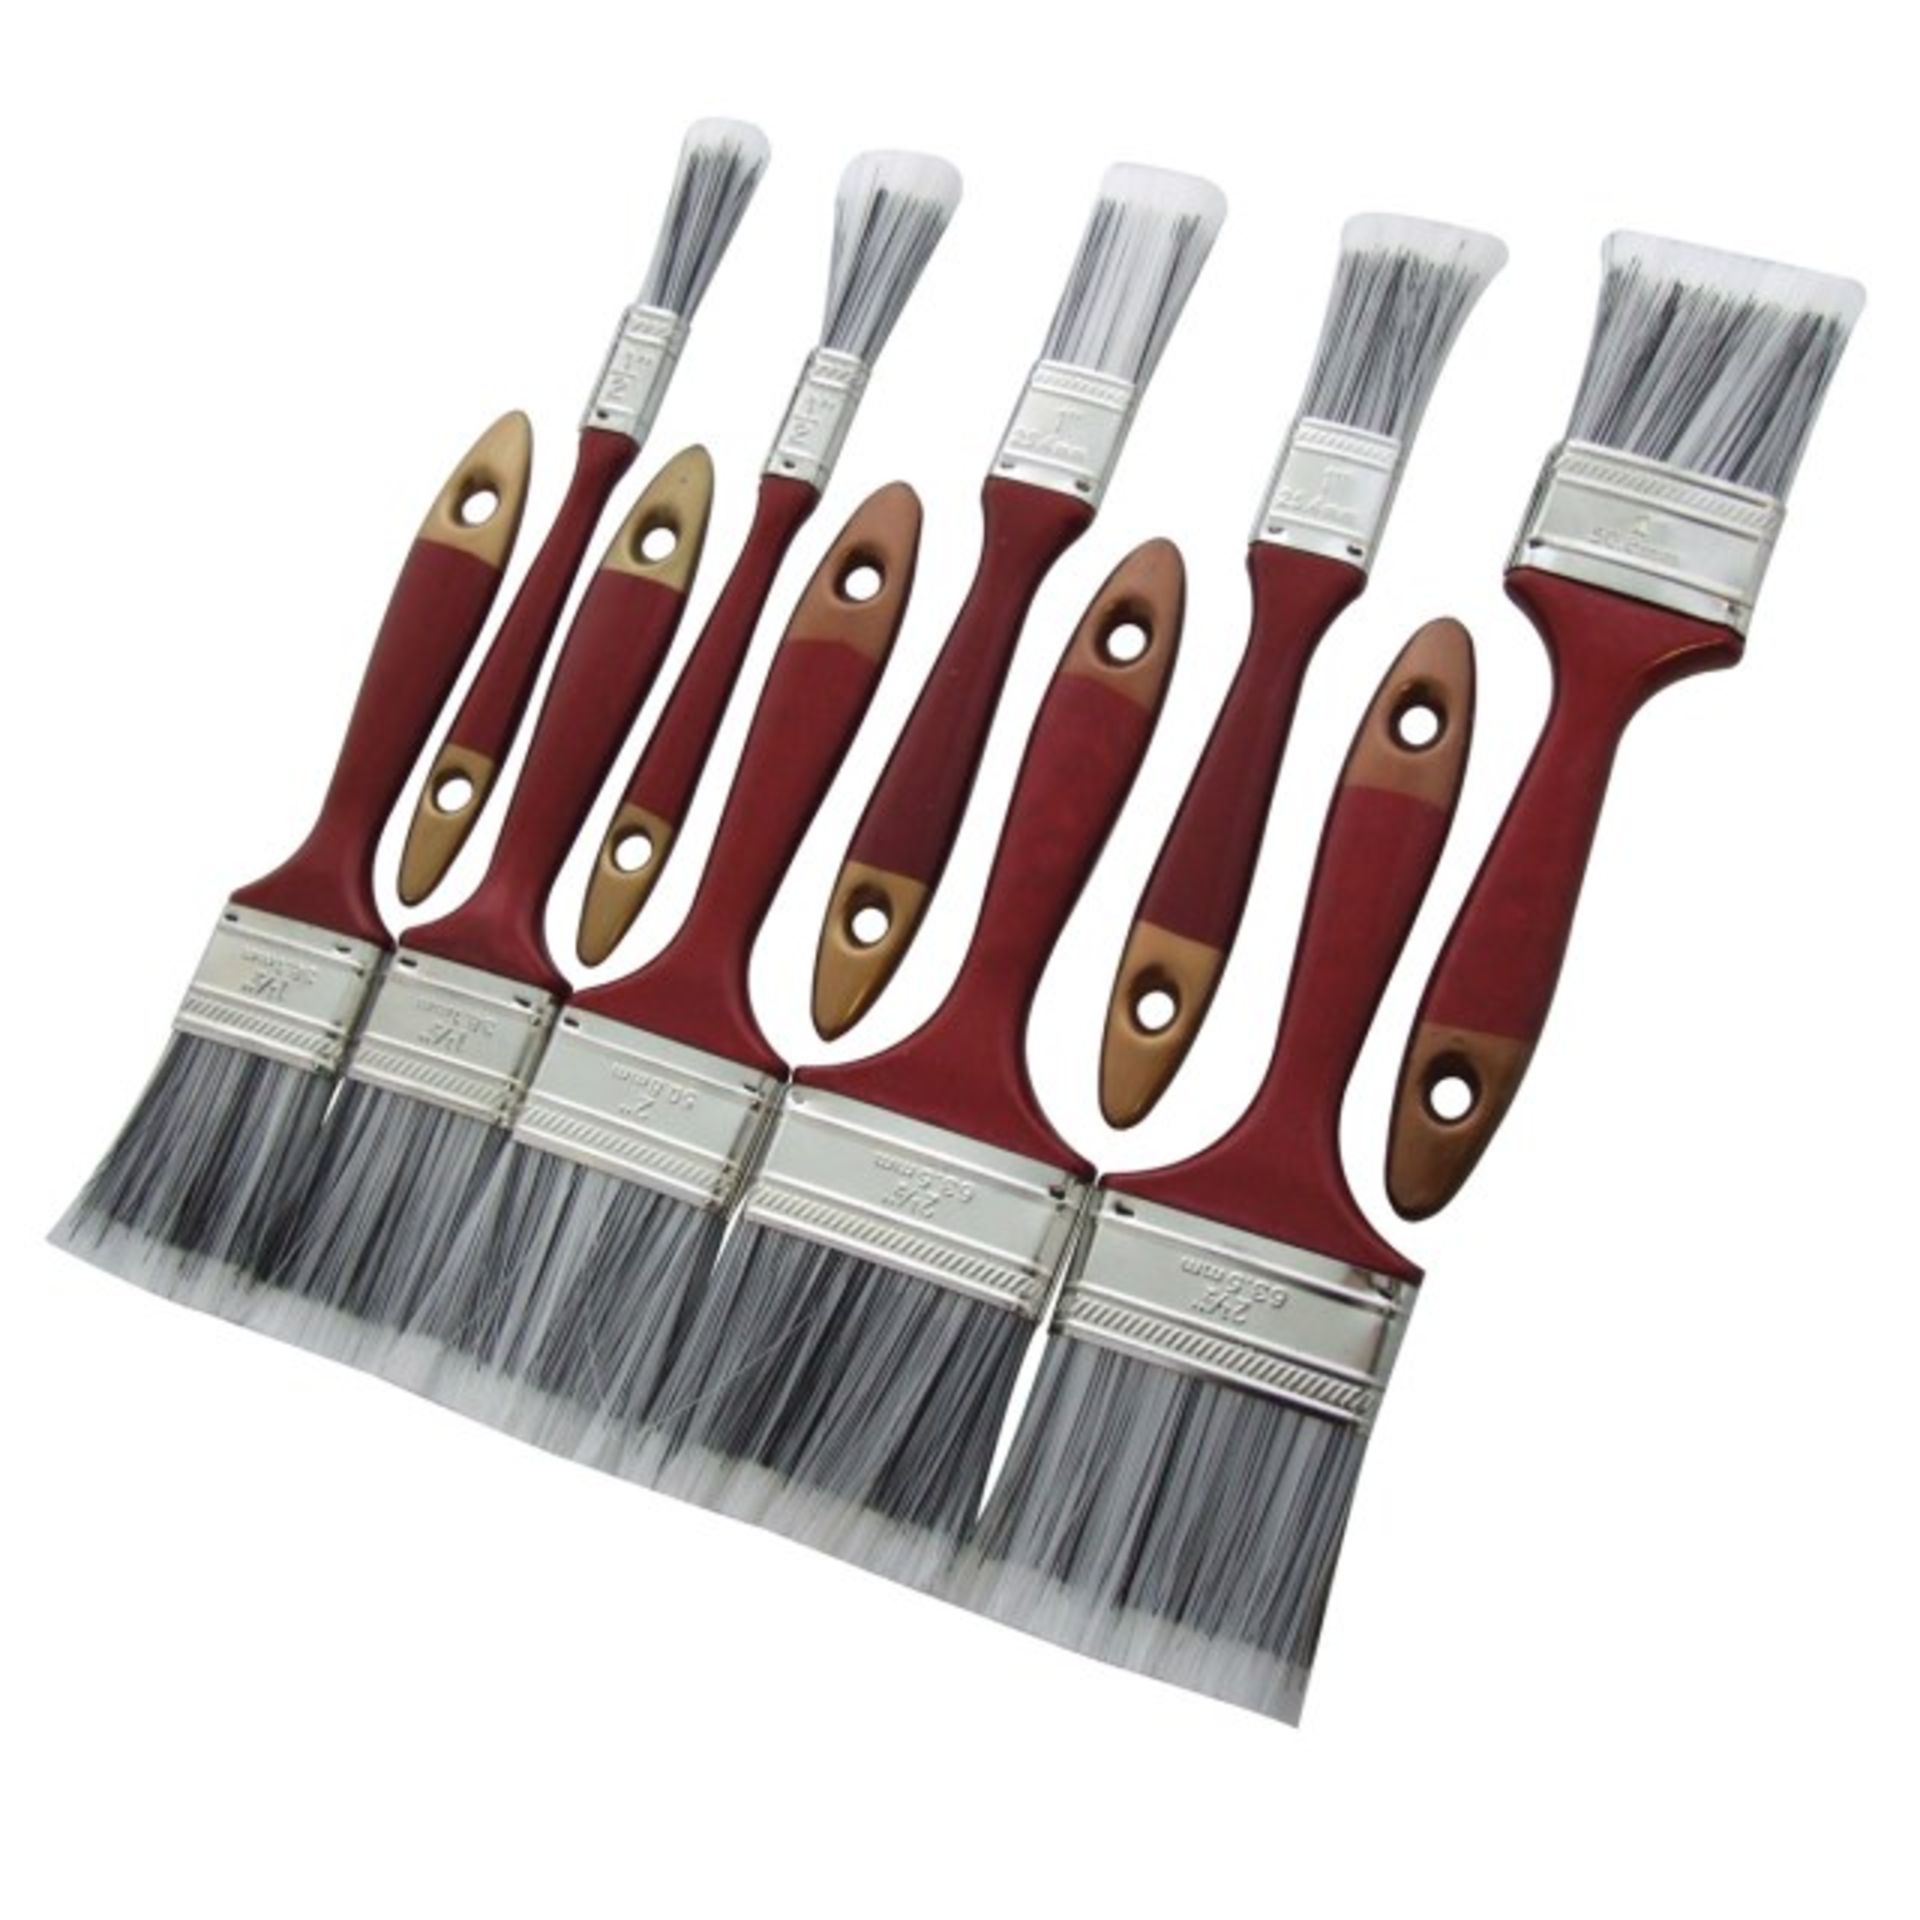 V *TRADE QTY* Brand New 10 Piece Paint Brush set X 12 YOUR BID PRICE TO BE MULTIPLIED BY TWELVE